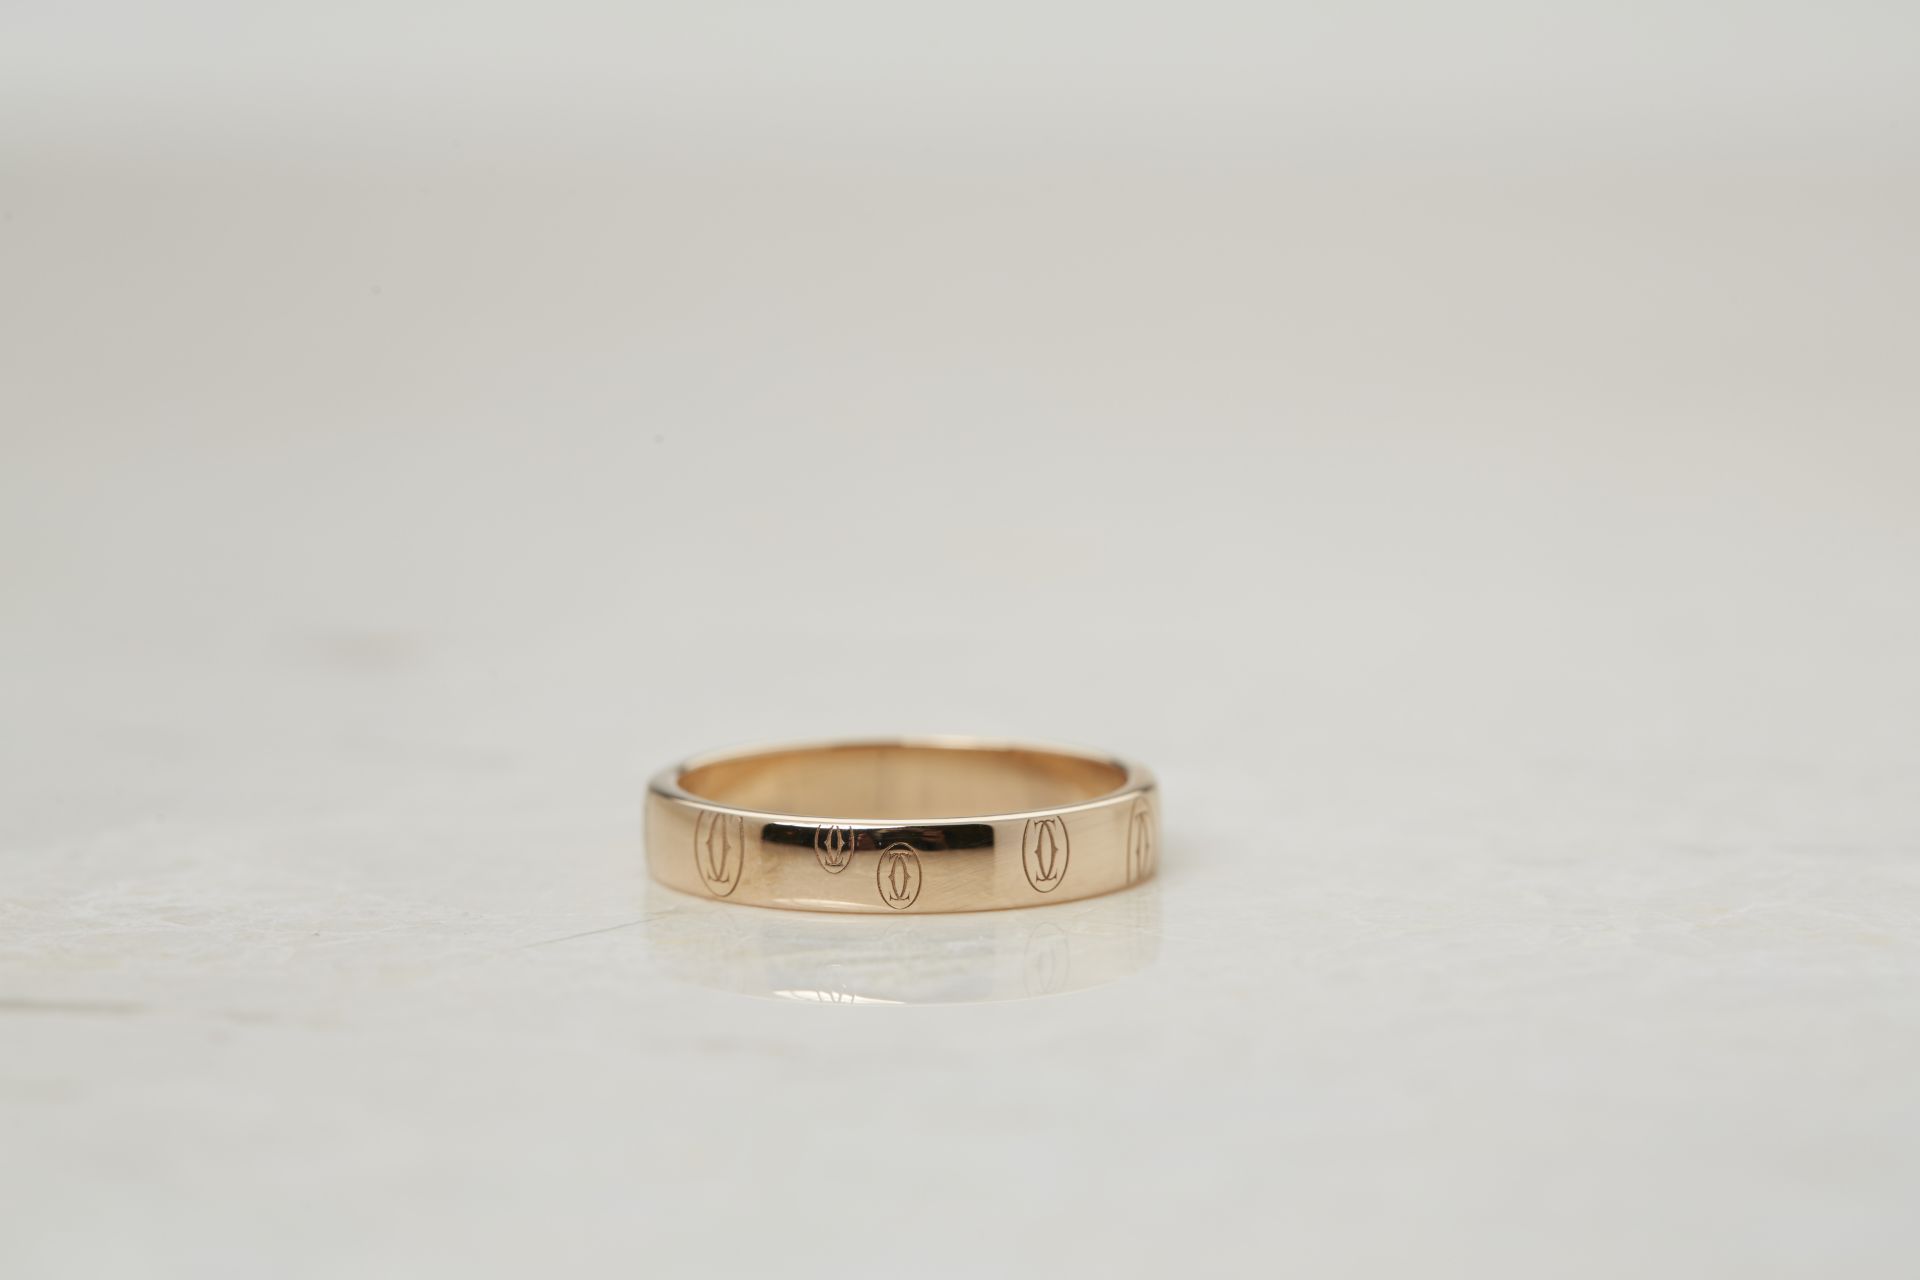 Cartier 18k Rose Gold Double C Logo Design Ring with Presentation Box - Image 3 of 7